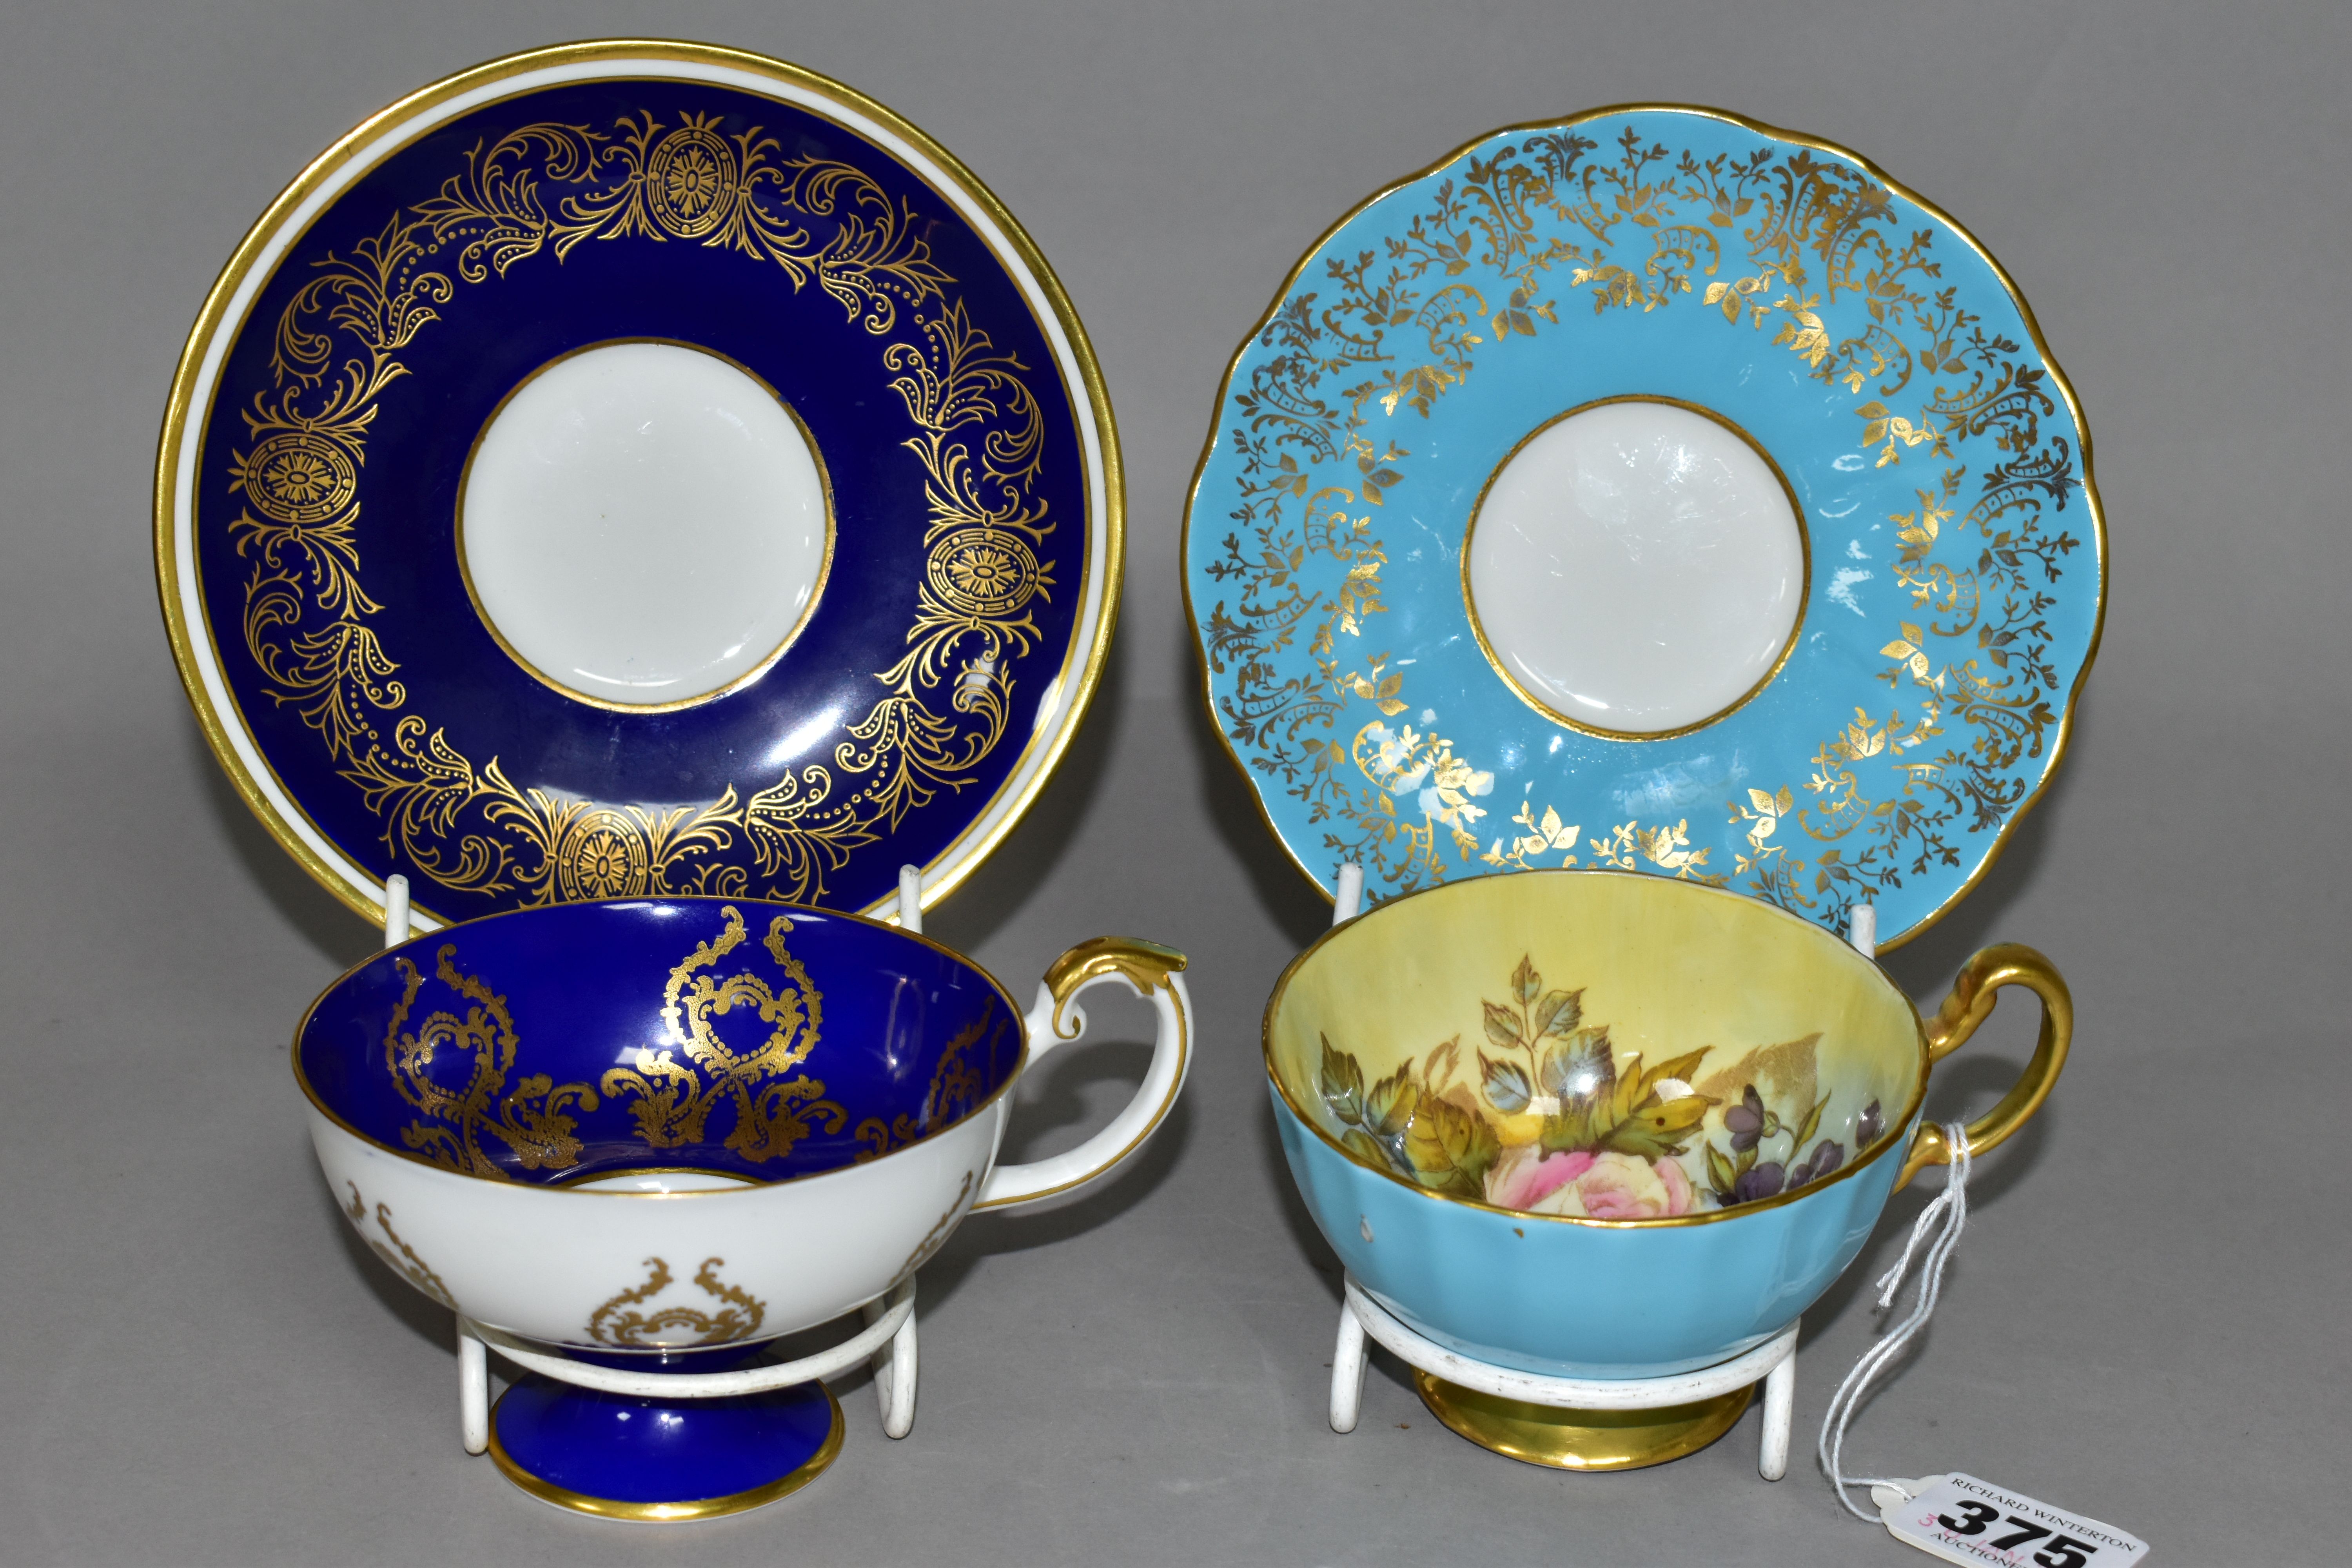 TWO AYNSLEY CABINET TEACUPS AND SAUCERS, comprising a turquoise cup and saucer, the interior of